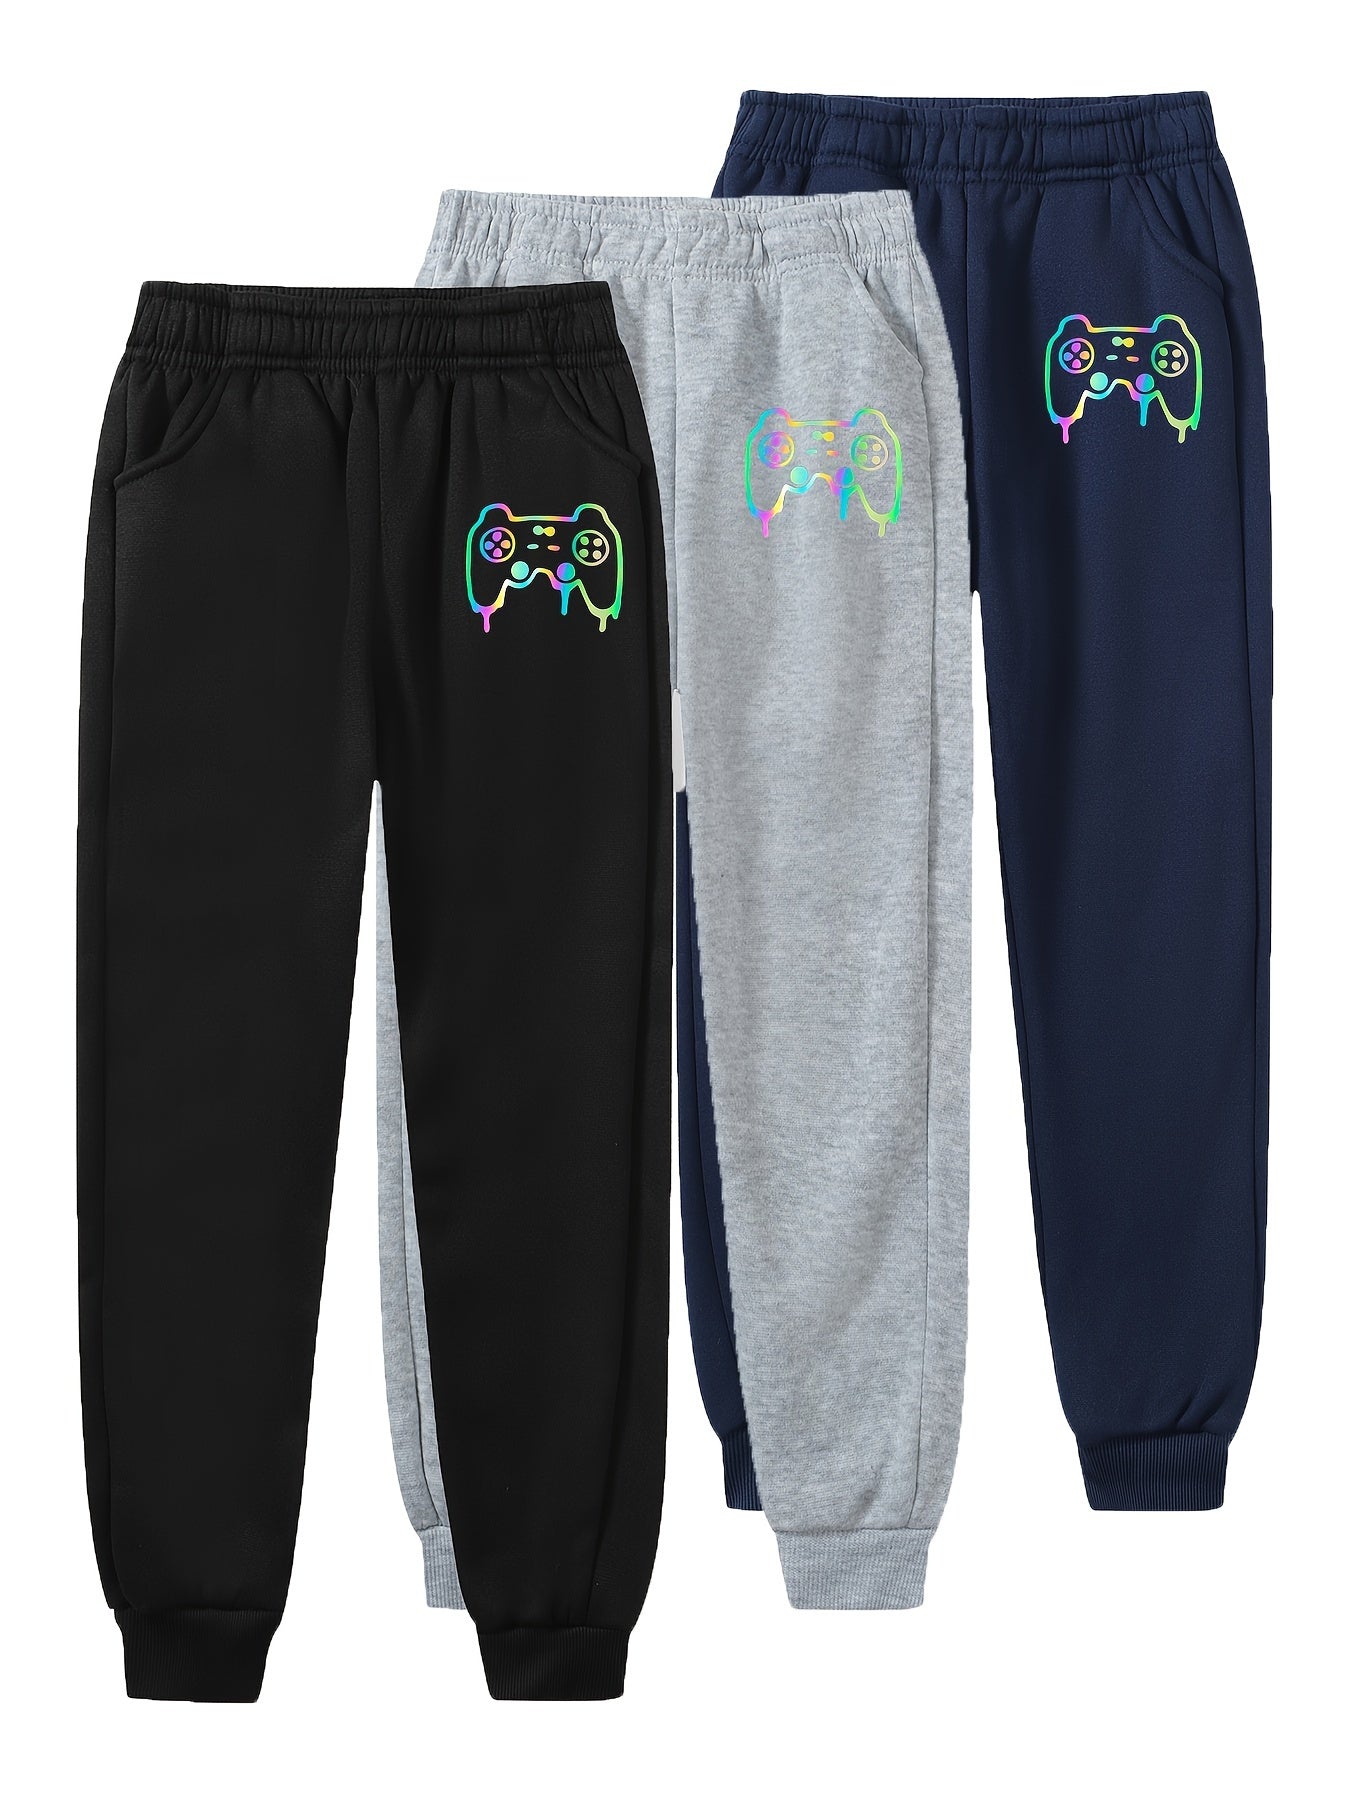 3pcs Kid's Game Console Print Sweatpants, Warm Fleece Elastic Waist Jogger Pants, Boy's Clothes For Fall Winter, As Gift